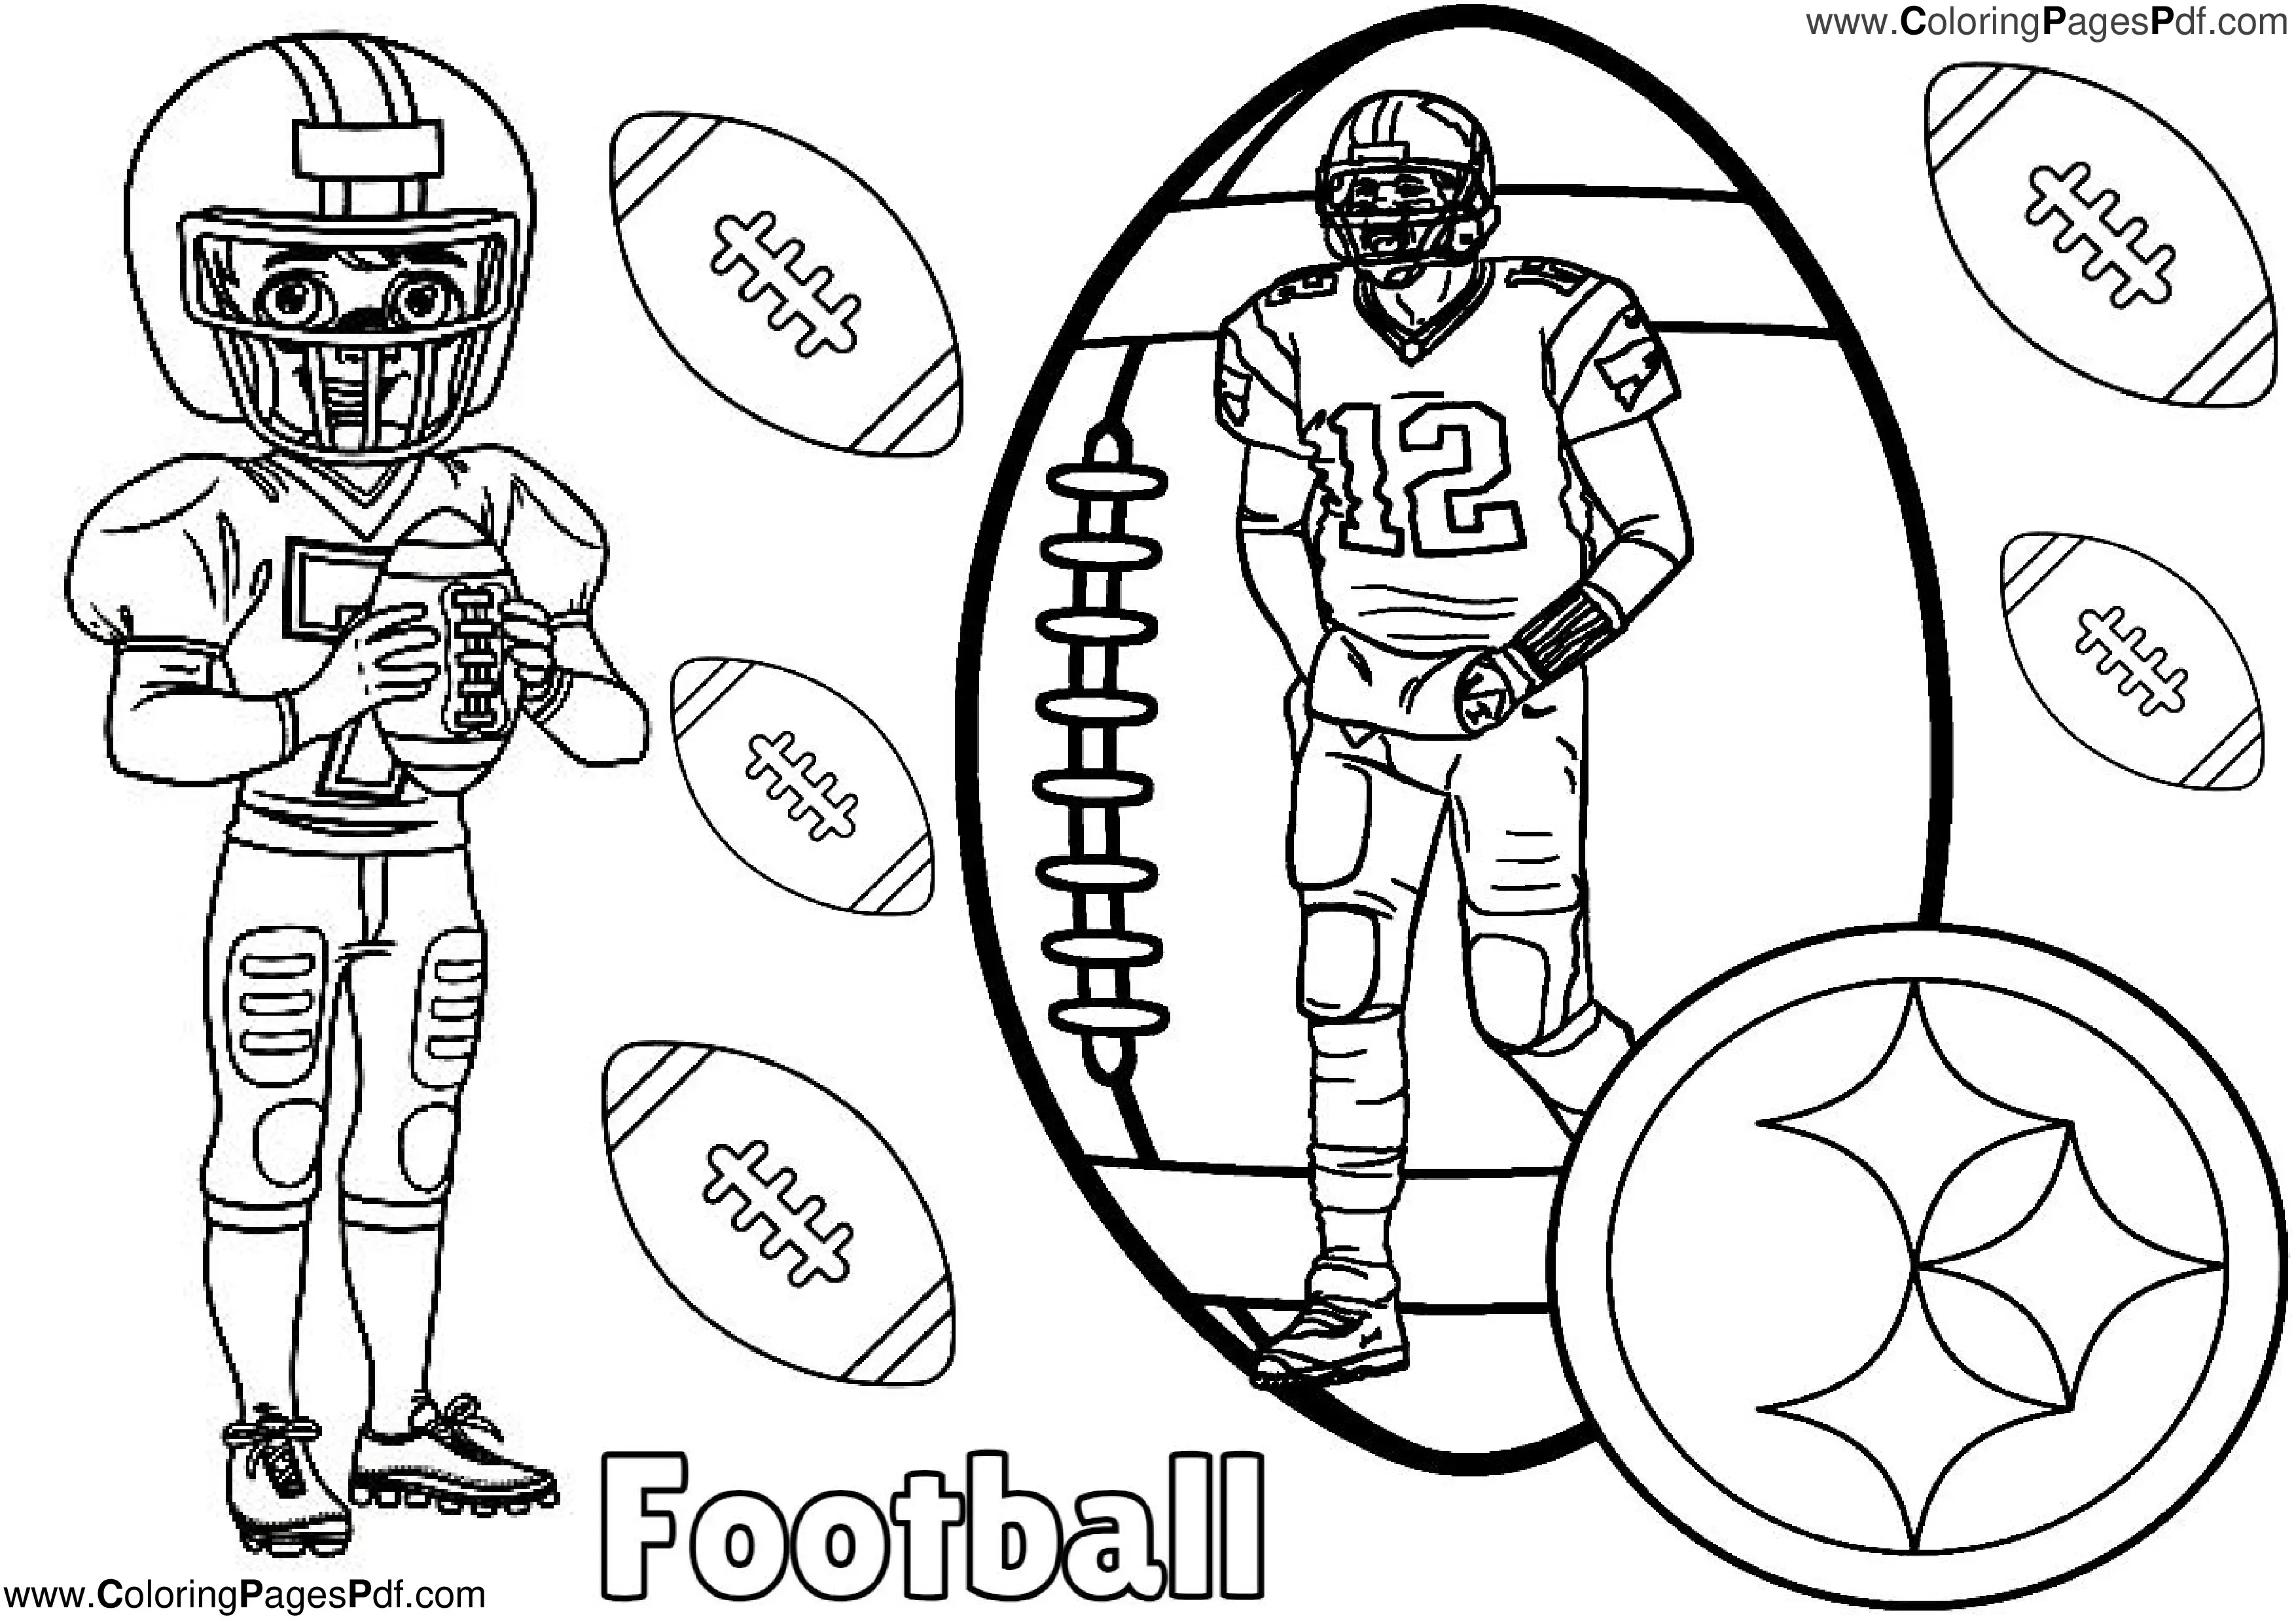 Printable football colouring pages